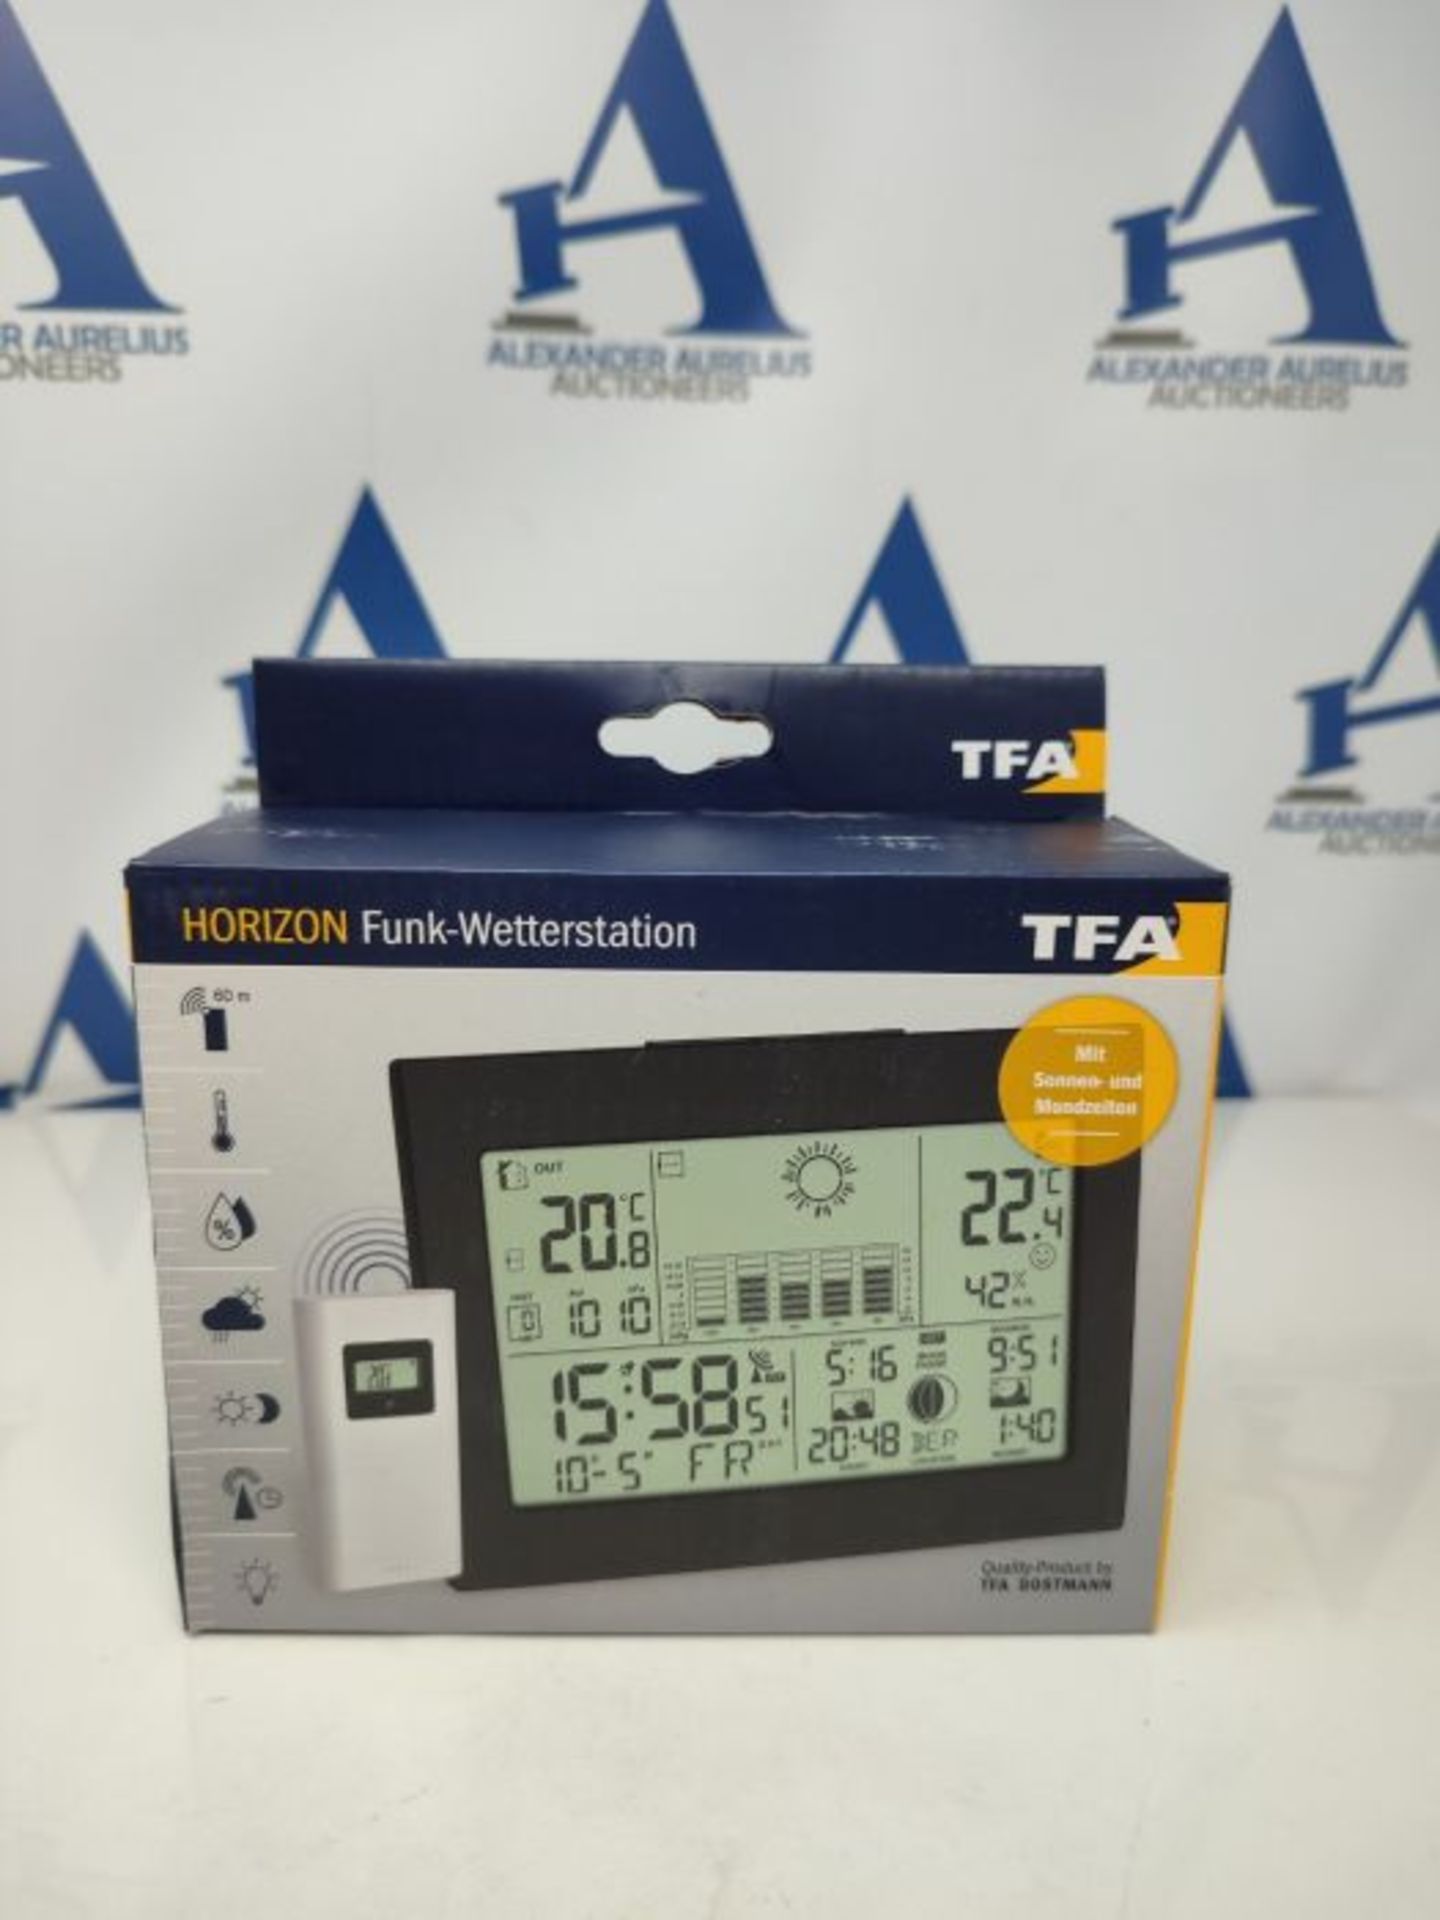 TFA Dostmann Horizon 35.1155.01 Wireless Weather Station with Outdoor Sensor Weather F - Image 2 of 3